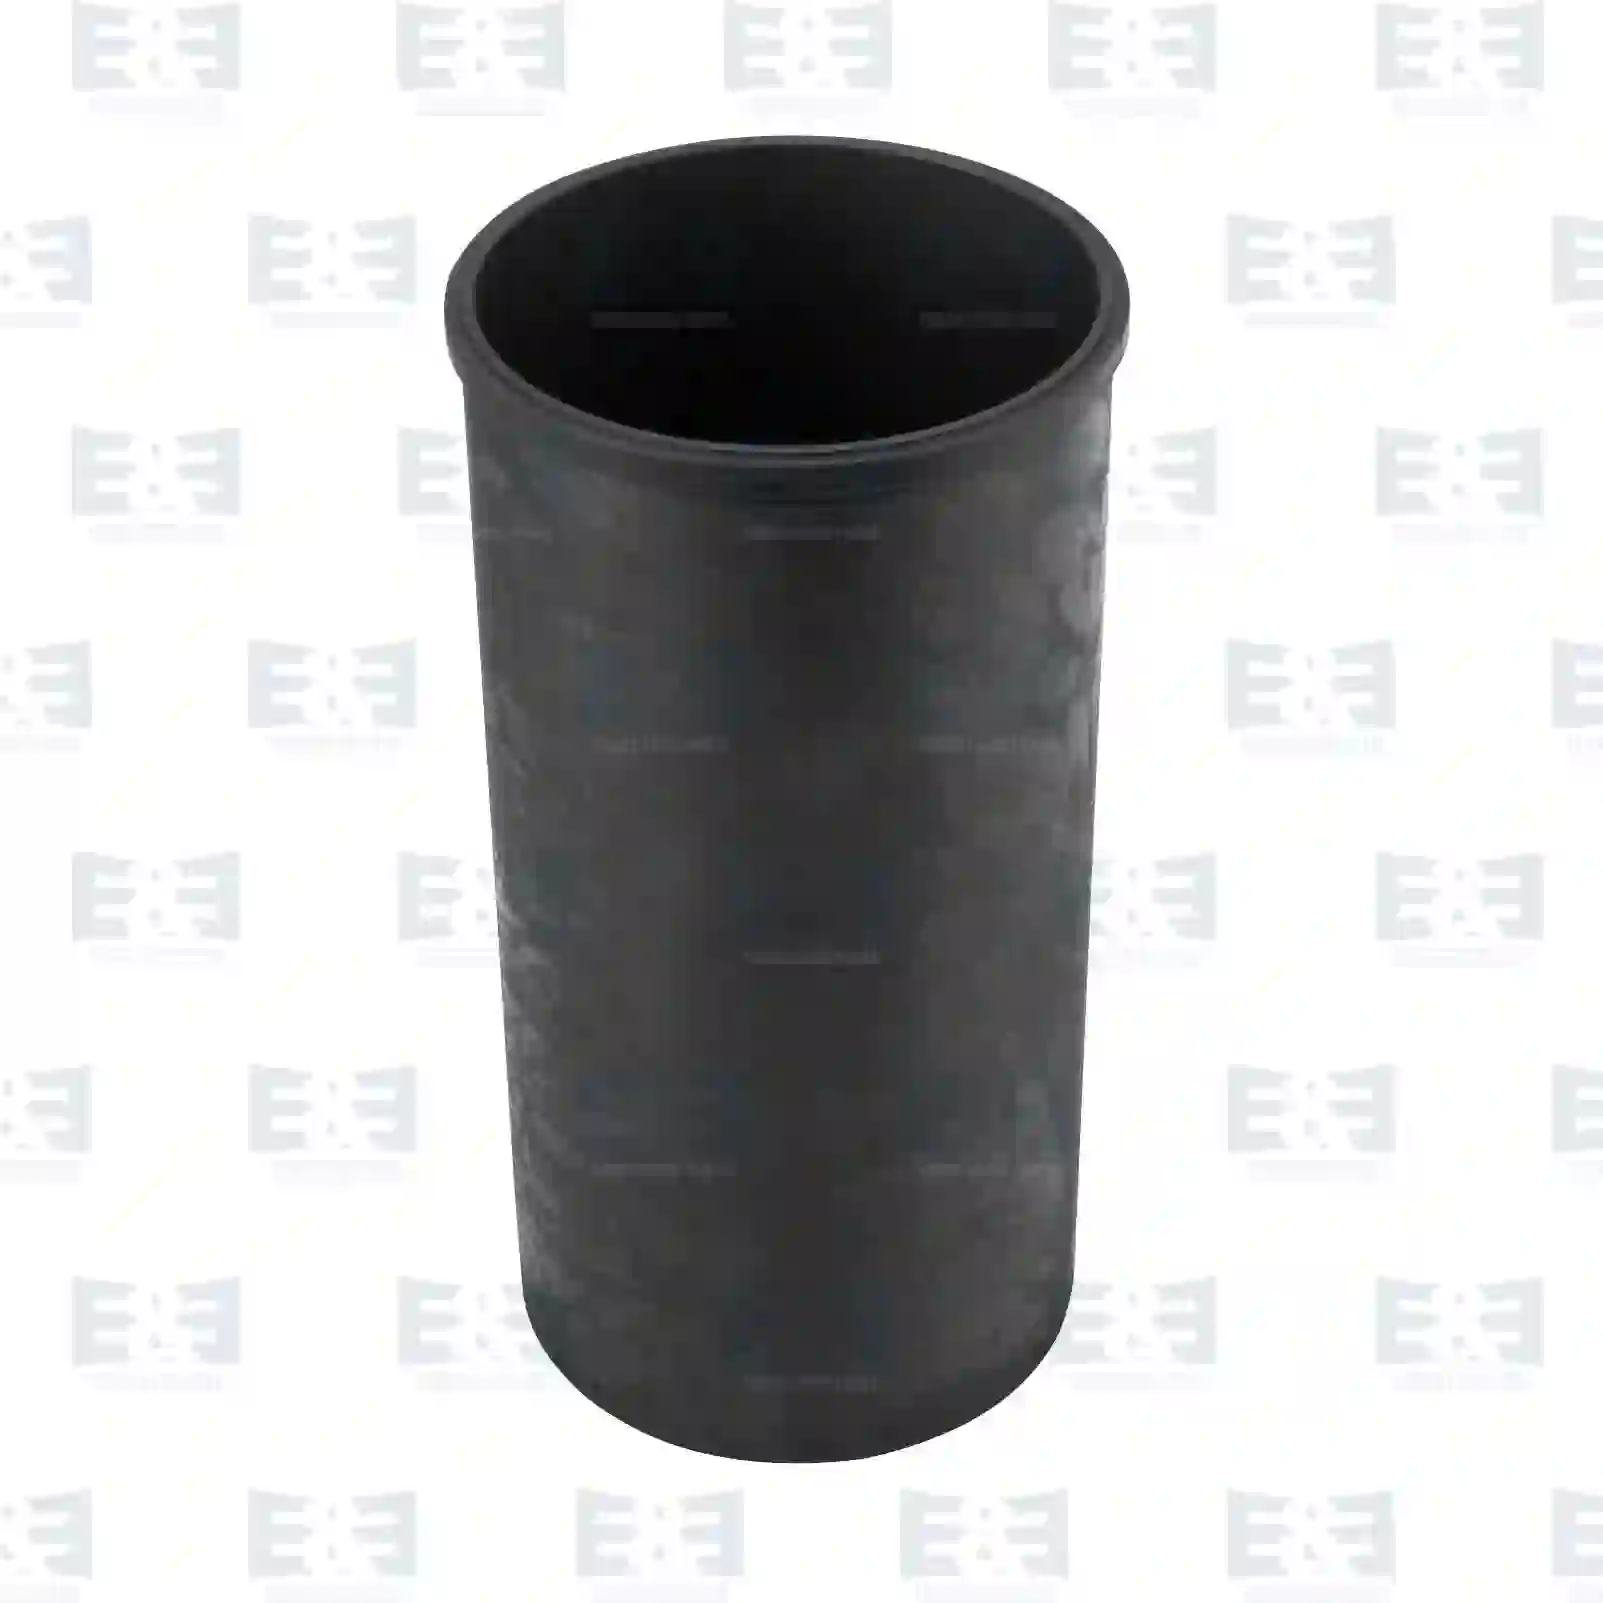 Cylinder liner, without seal rings, 2E2207811, 5000678033, , , ||  2E2207811 E&E Truck Spare Parts | Truck Spare Parts, Auotomotive Spare Parts Cylinder liner, without seal rings, 2E2207811, 5000678033, , , ||  2E2207811 E&E Truck Spare Parts | Truck Spare Parts, Auotomotive Spare Parts